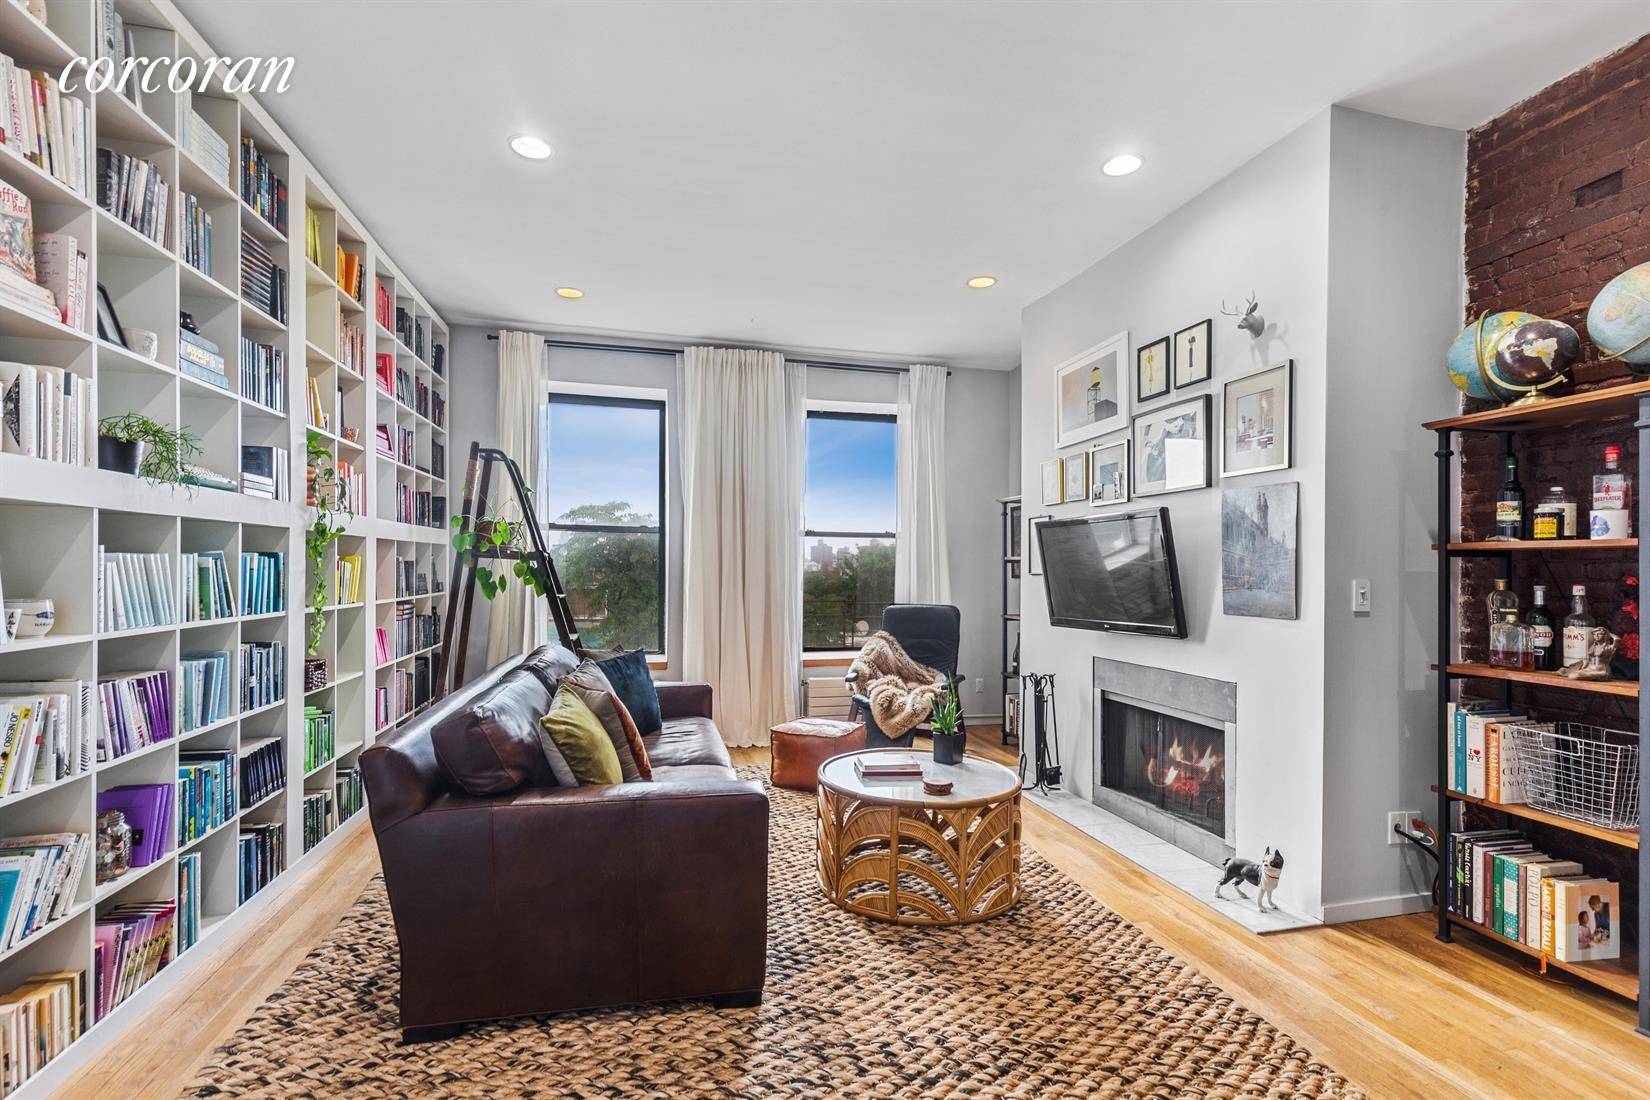 This spacious loft like two bedroom, one bath apartment will charm you with its grand proportions, excellent light, and Empire State building view through oversized west facing windows.